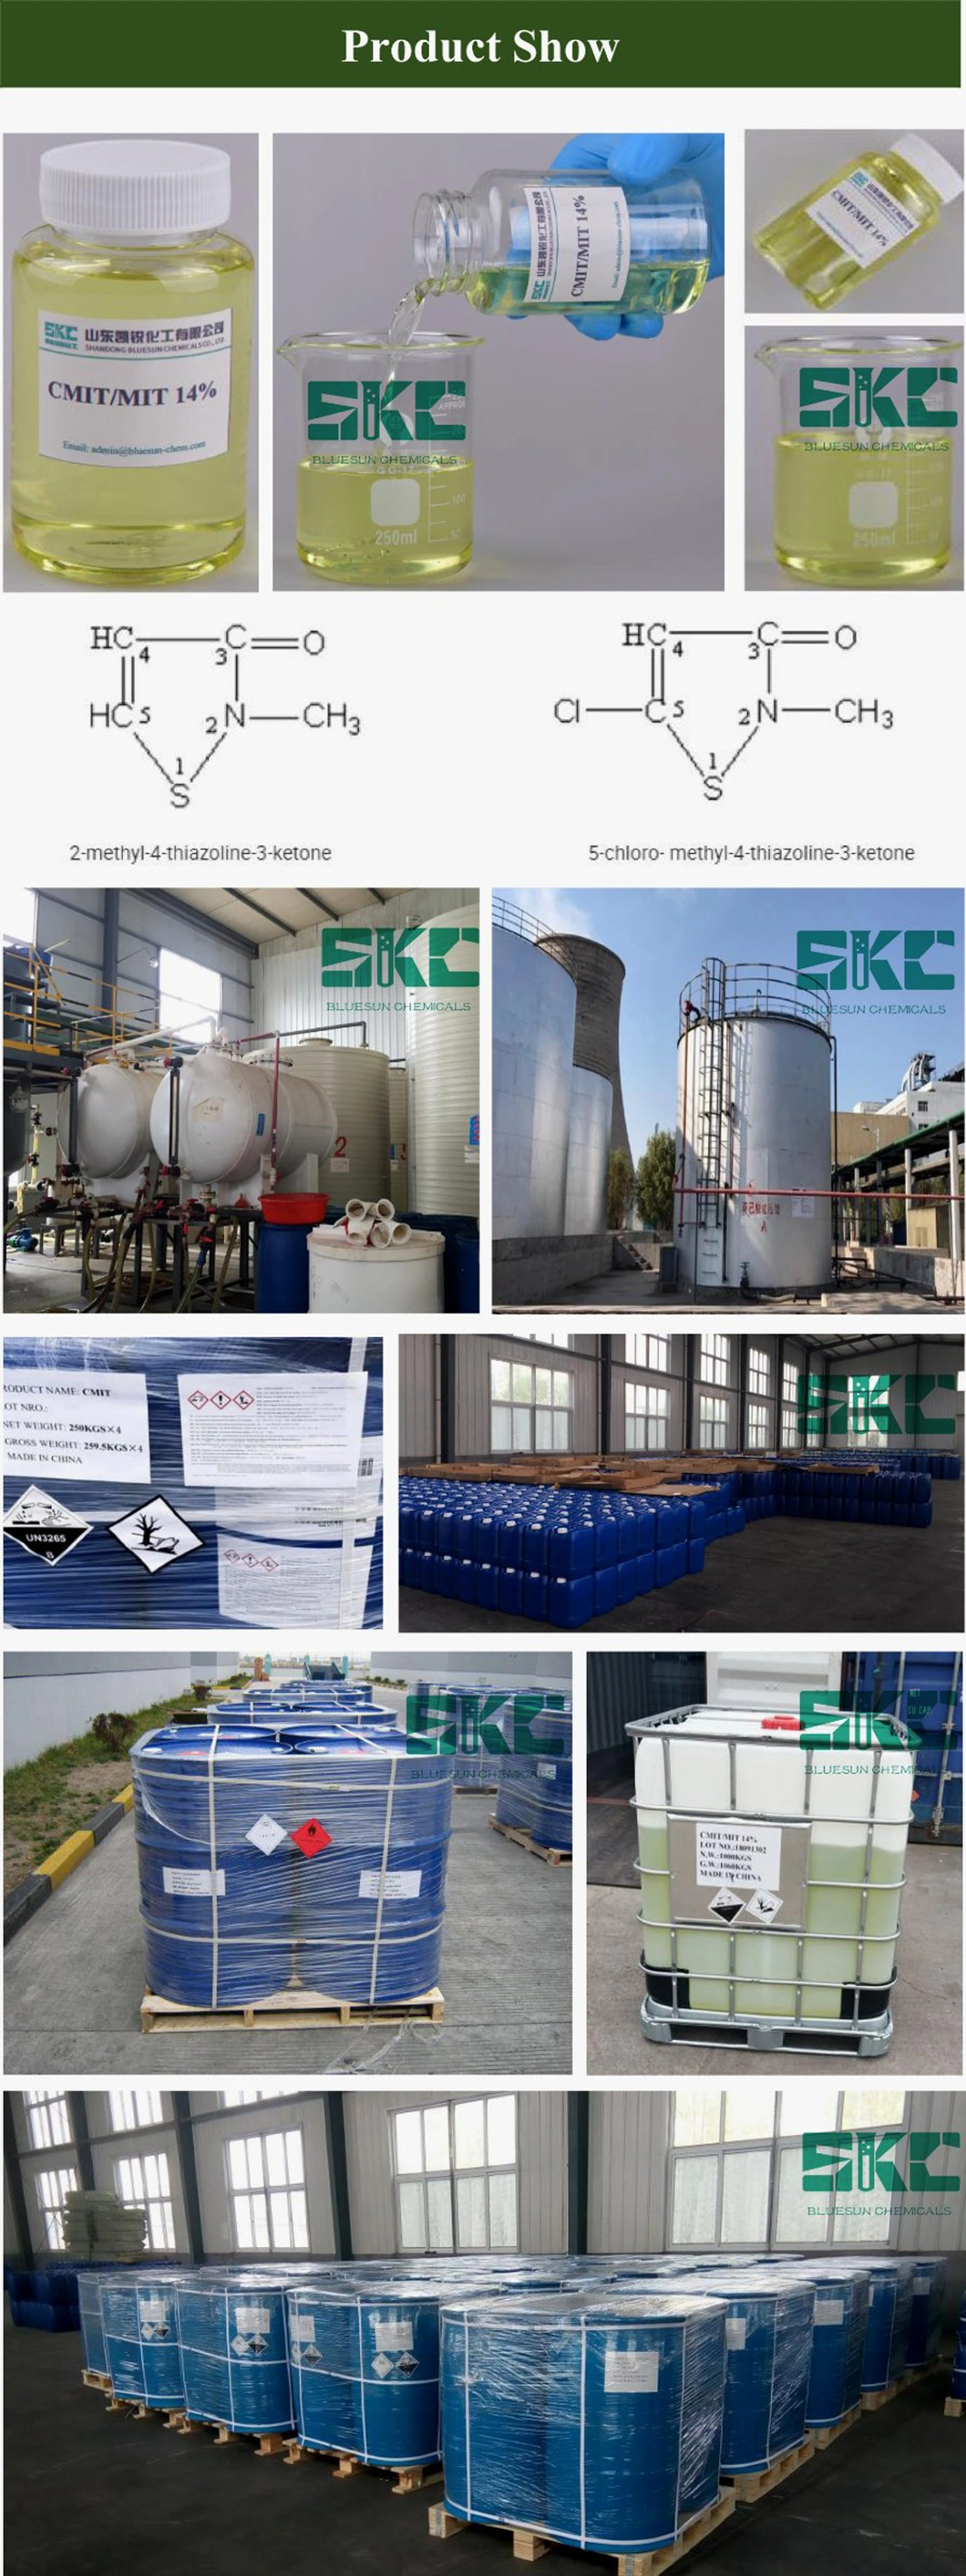 Environmental Cmit/Mit Bactericide for Industrial Cooling Water